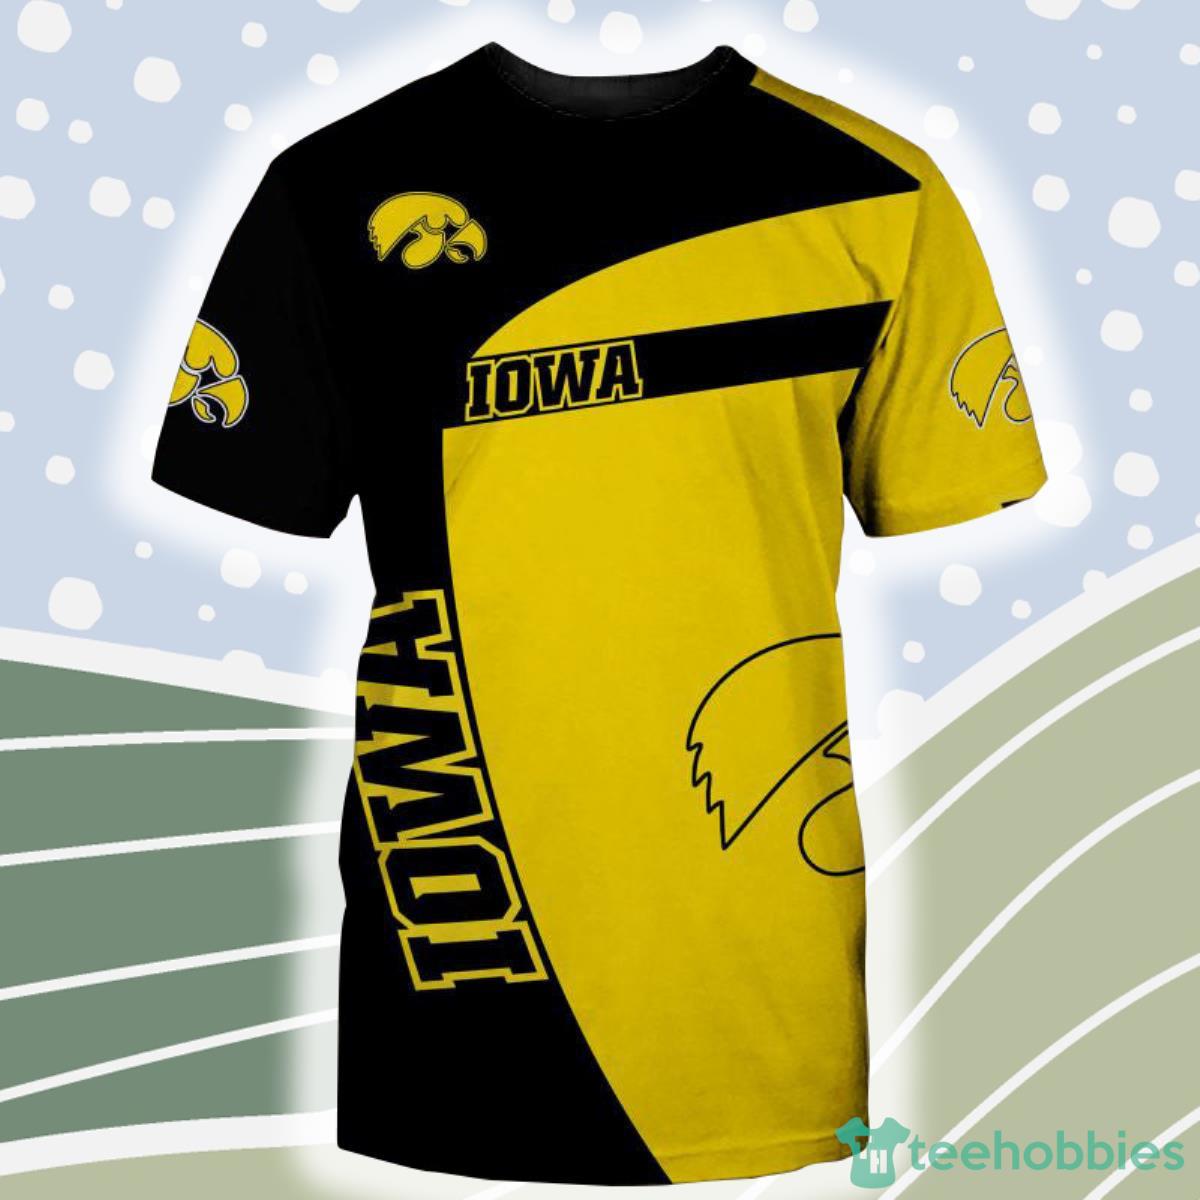 Iowa Hawkeyes NCAA Shirt 3D For Fans Product Photo 1